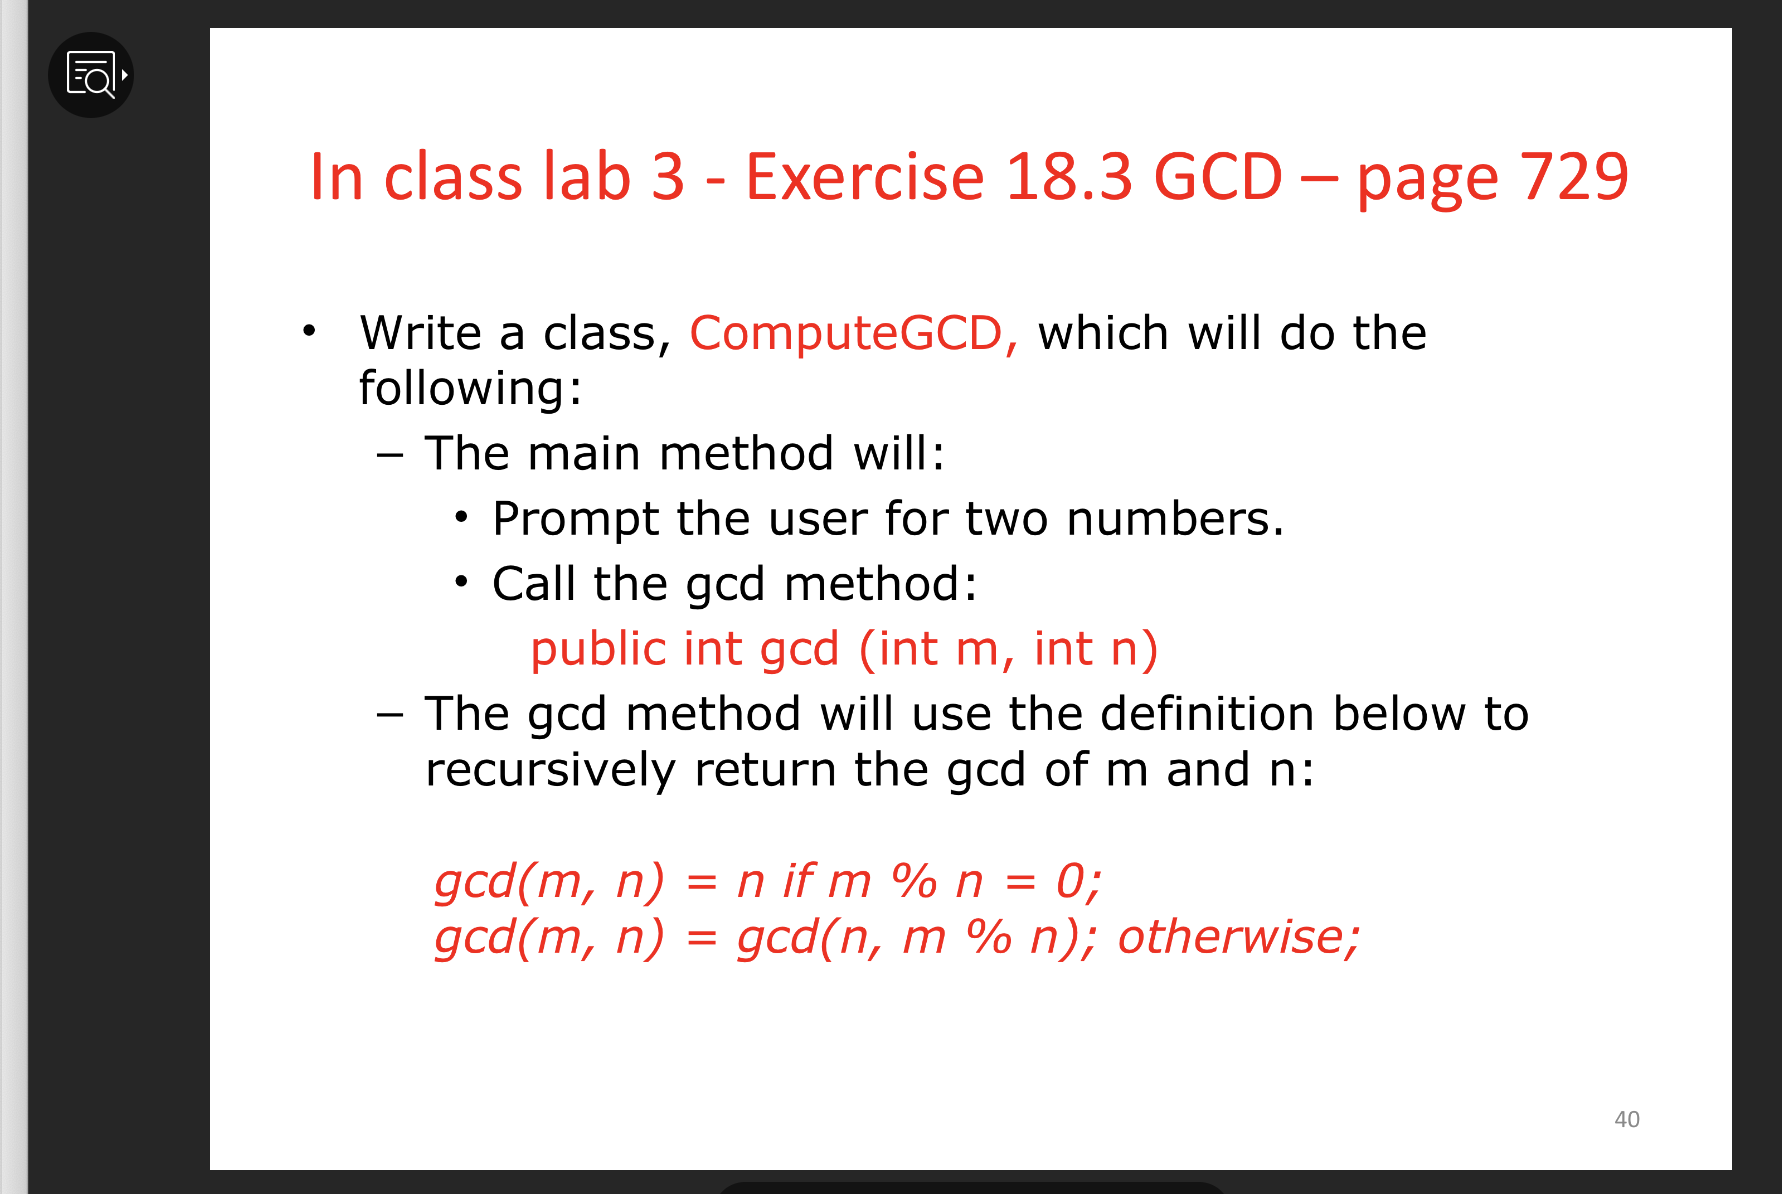 In class lab 3 - Exercise 18.3 GCD – page 729
Write a class, ComputeGCD, which will do the
following:
The main method will:
Prompt the user for two numbers.
• Call the gcd method:
public int gcd (int m, int n)
- The gcd method will use the definition below to
recursively return the gcd of m and n:
gcd(m, n) = n if m % n =
gcd(m, n) = gcd(n, m % n); otherwise;
0;
40
